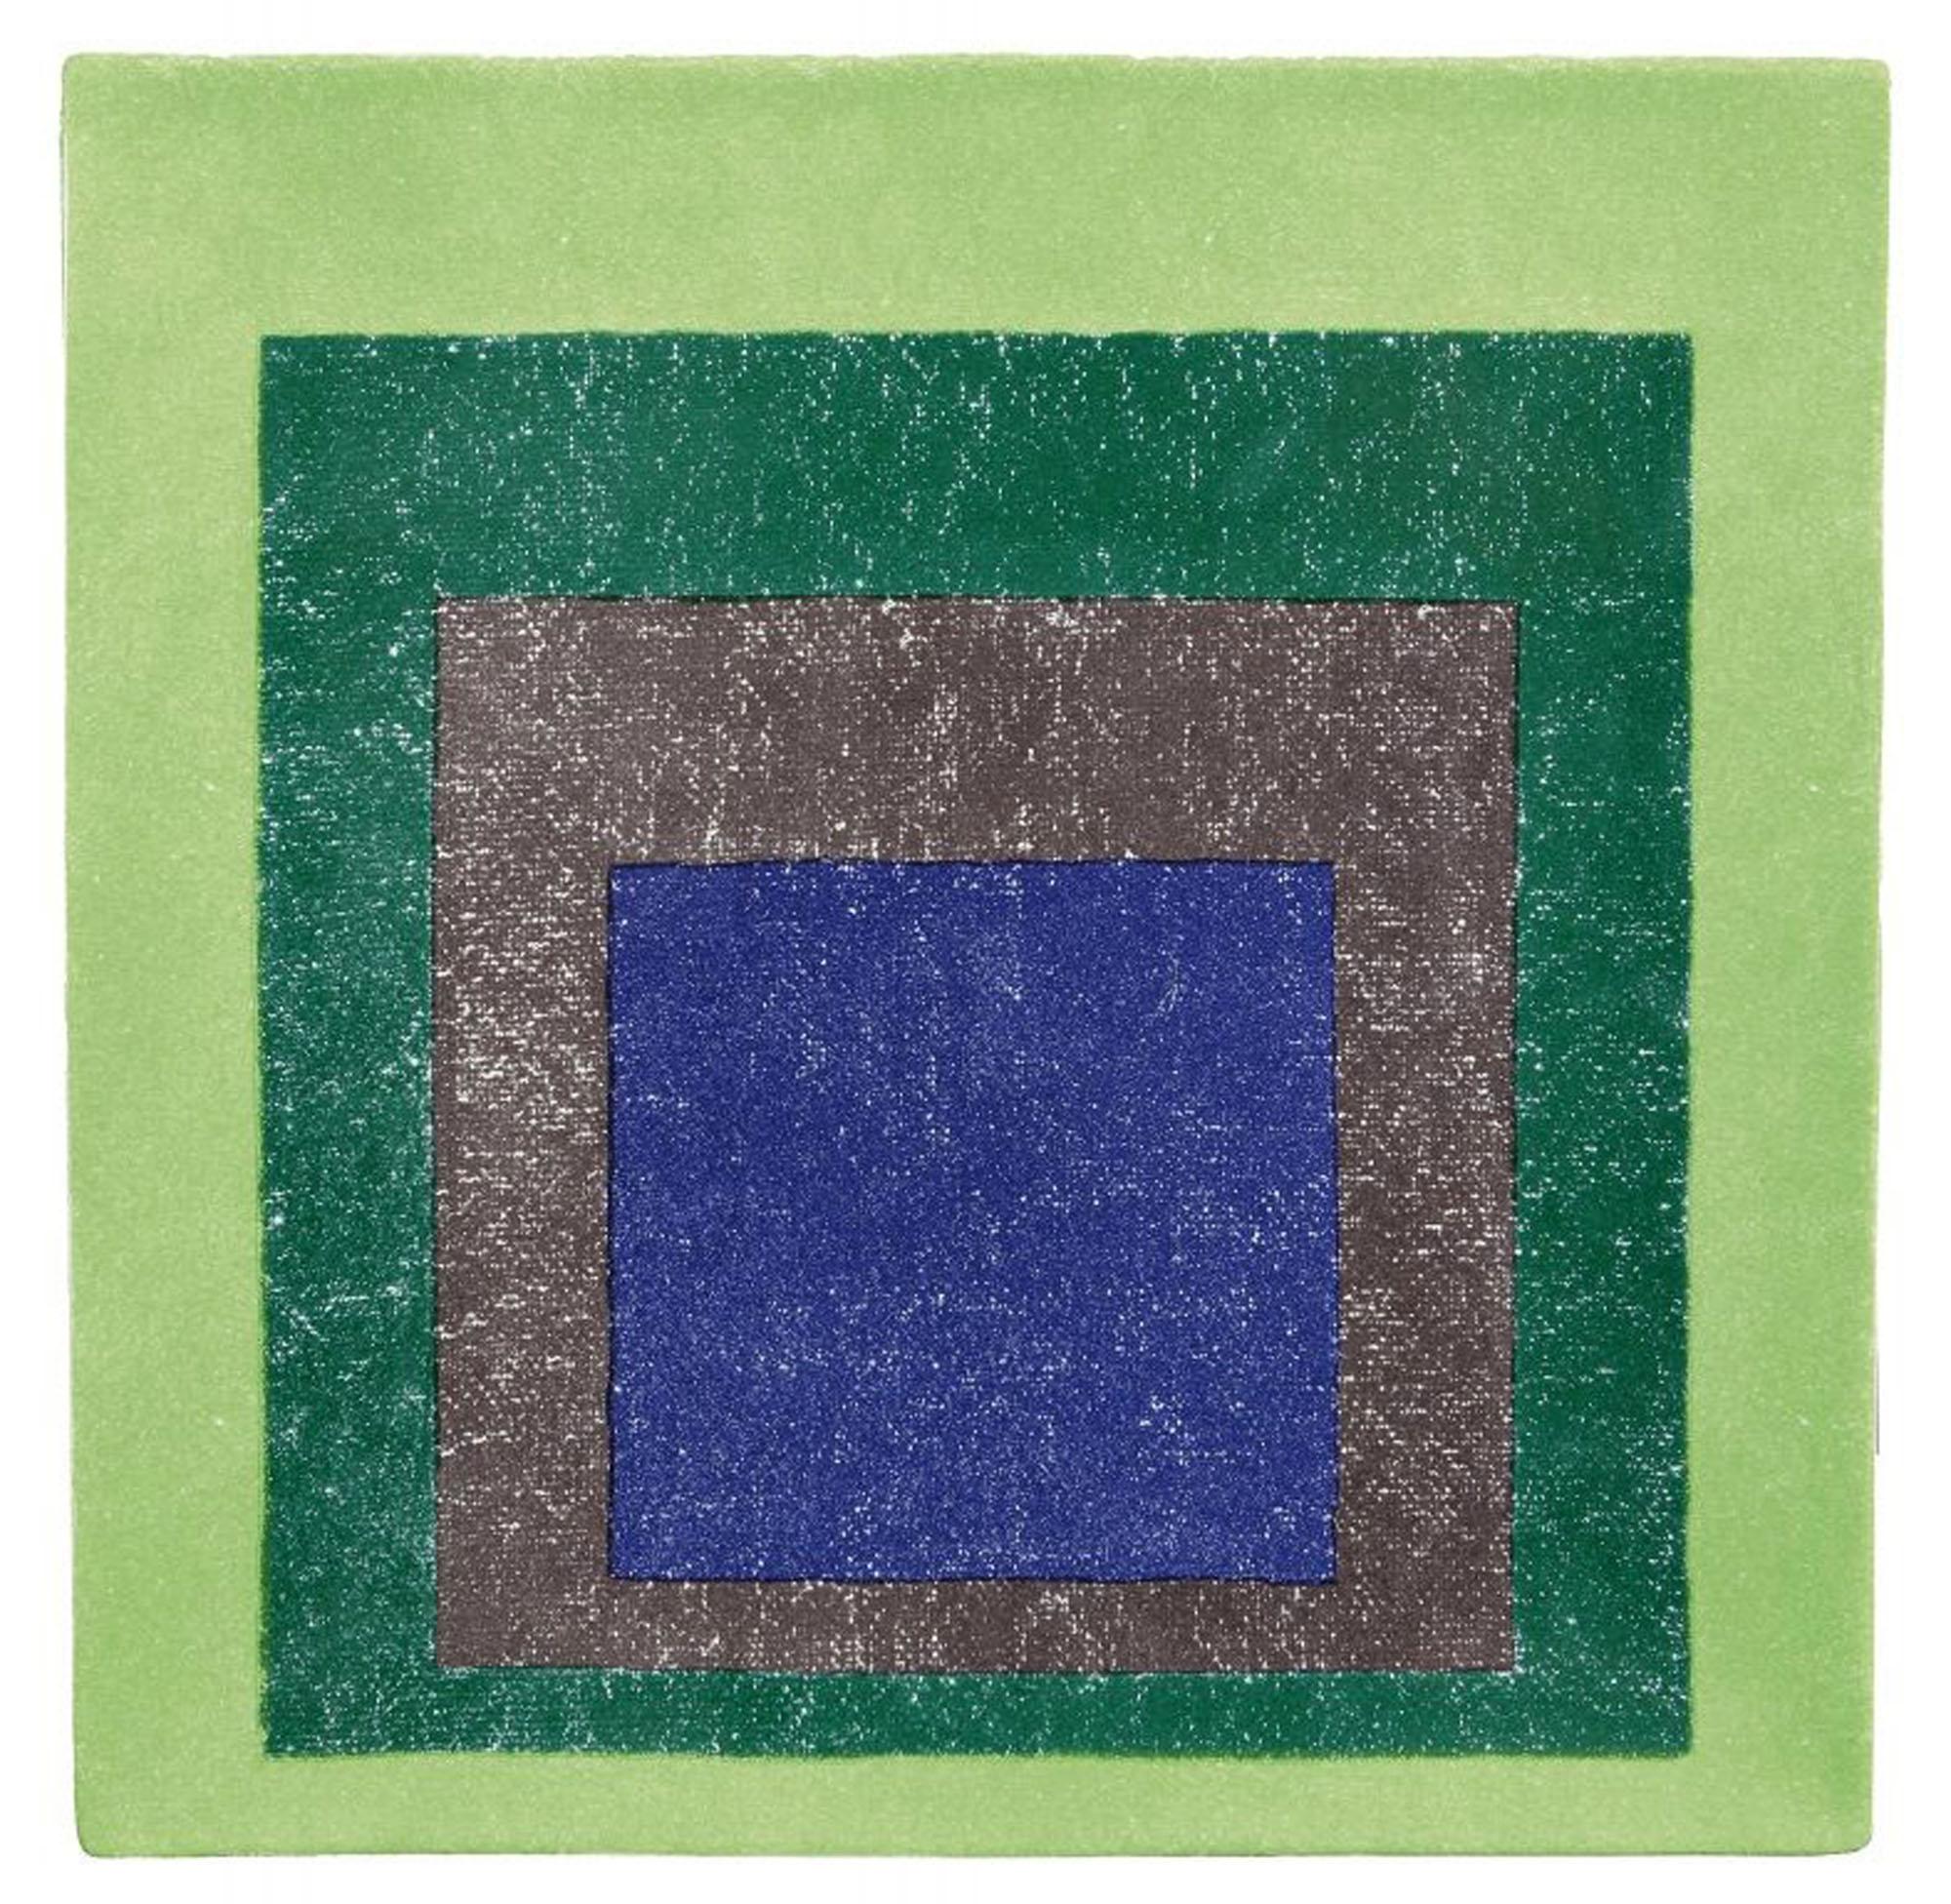 Study for Homage to the Square ceramic - Art by Josef Albers